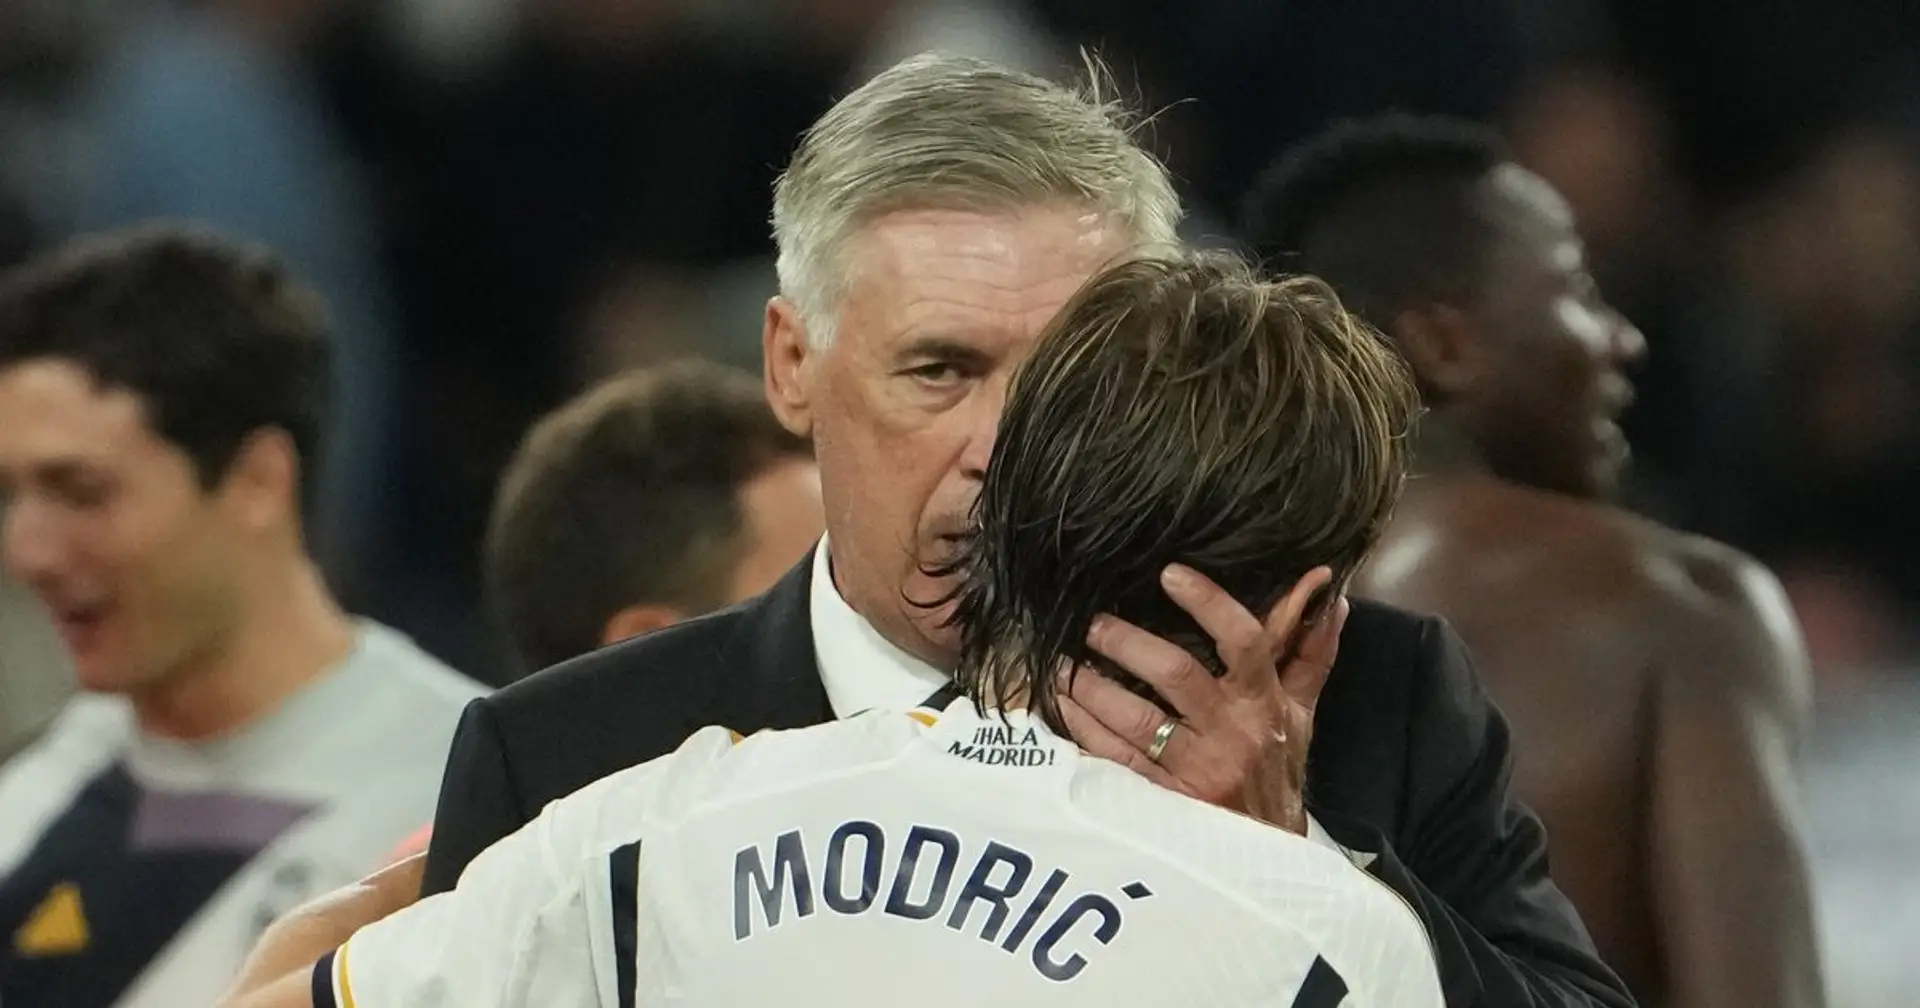 Modric's agent provides update on his Real Madrid future